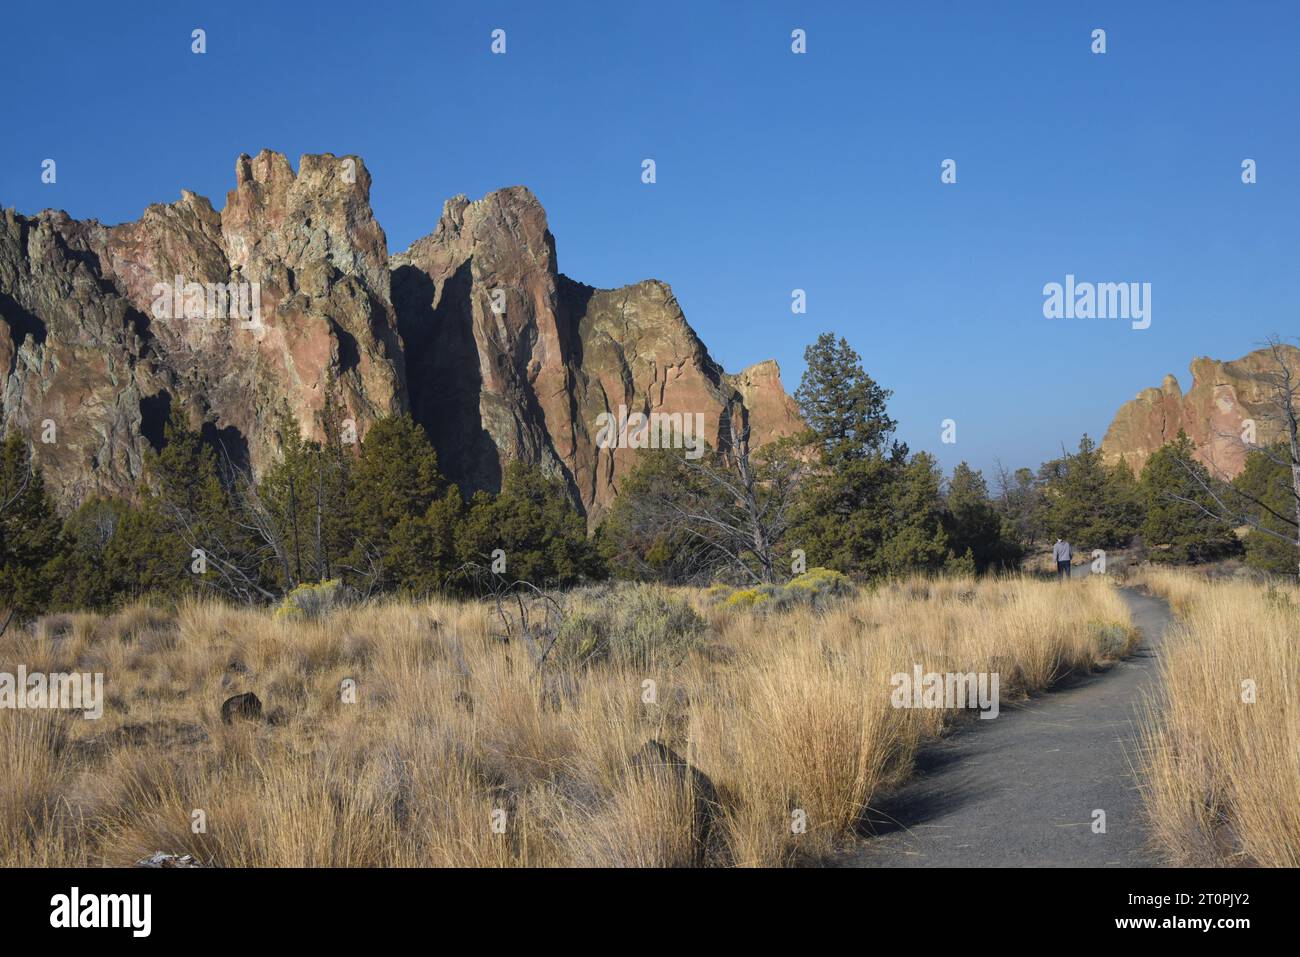 Young man enjoys a morning hike along a curvy trail, in Smith Rock State Park, Oregon.  He is wearing a blue sweatshirt. Stock Photo